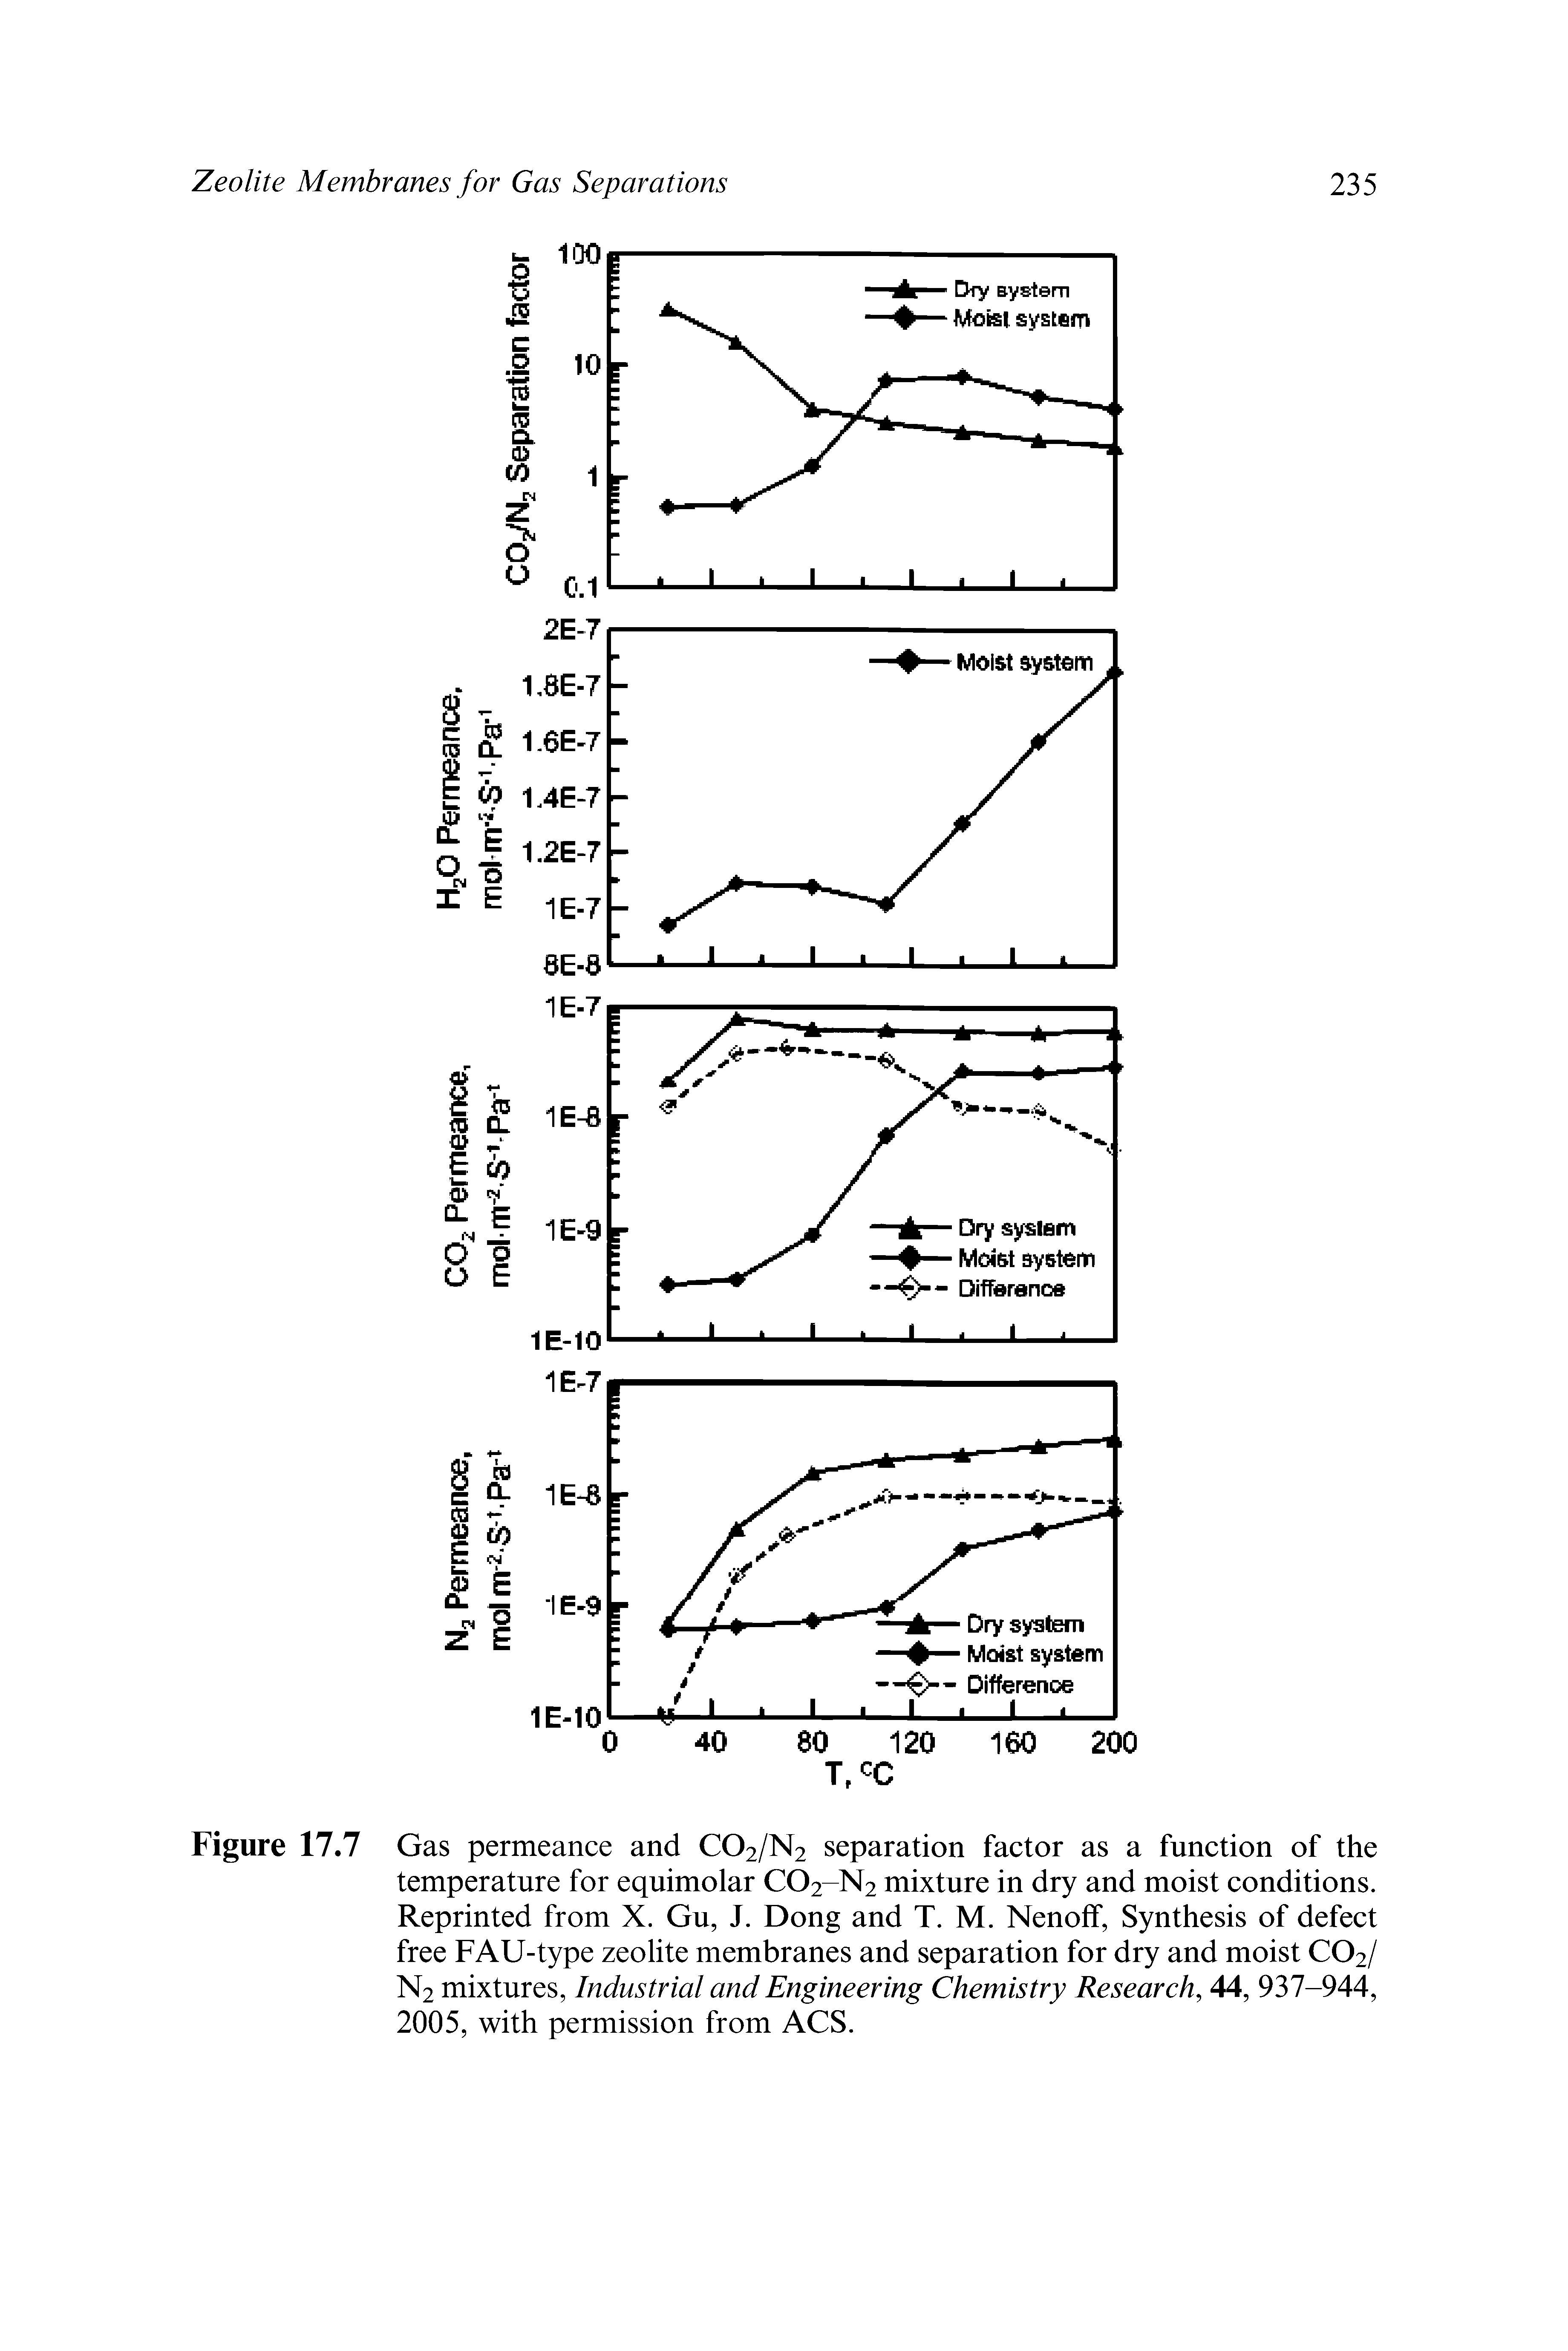 Figure 17.7 Gas permeance and CO2/N2 separation factor as a function of the temperature for equimolar CO2-N2 mixture in dry and moist conditions. Reprinted from X. Gu, J. Dong and T. M. Nenoff, Synthesis of defect free FAU-type zeolite membranes and separation for dry and moist CO2/ N2 mixtures, Industrial and Engineering Chemistry Research, 44, 937-944, 2005, with permission from ACS.